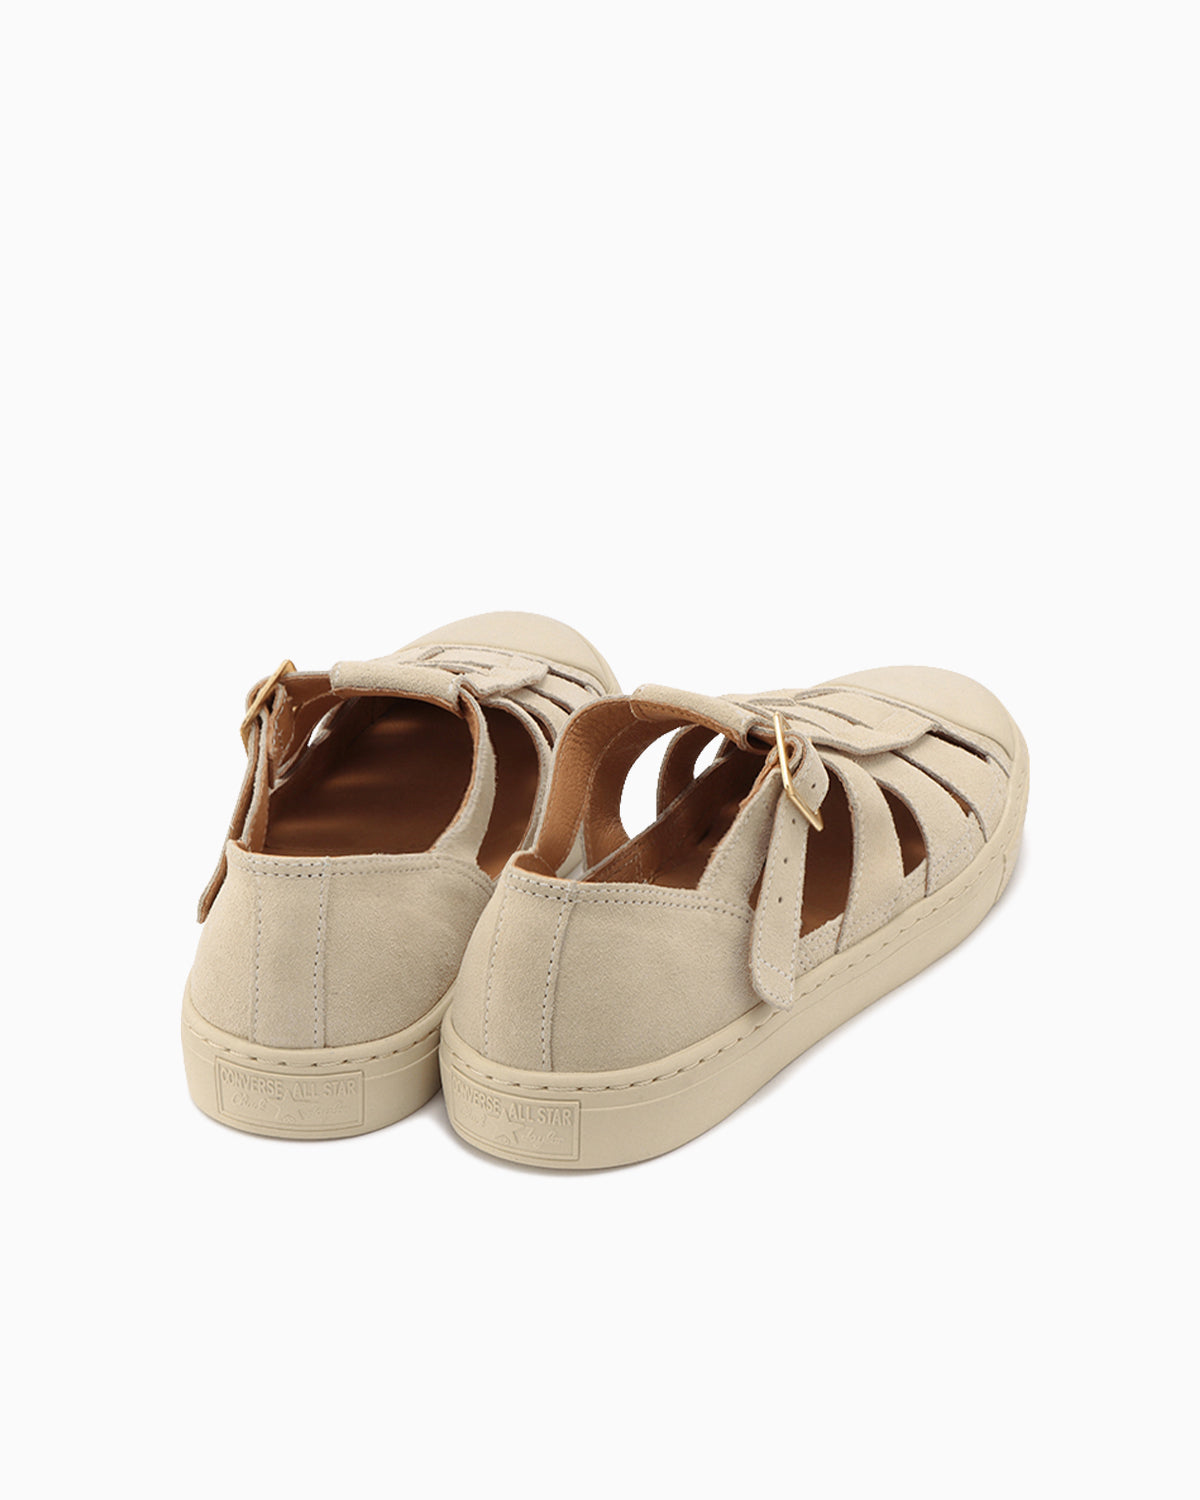 ALL STAR COUPE GURKHA-SANDAL SUEDE OX